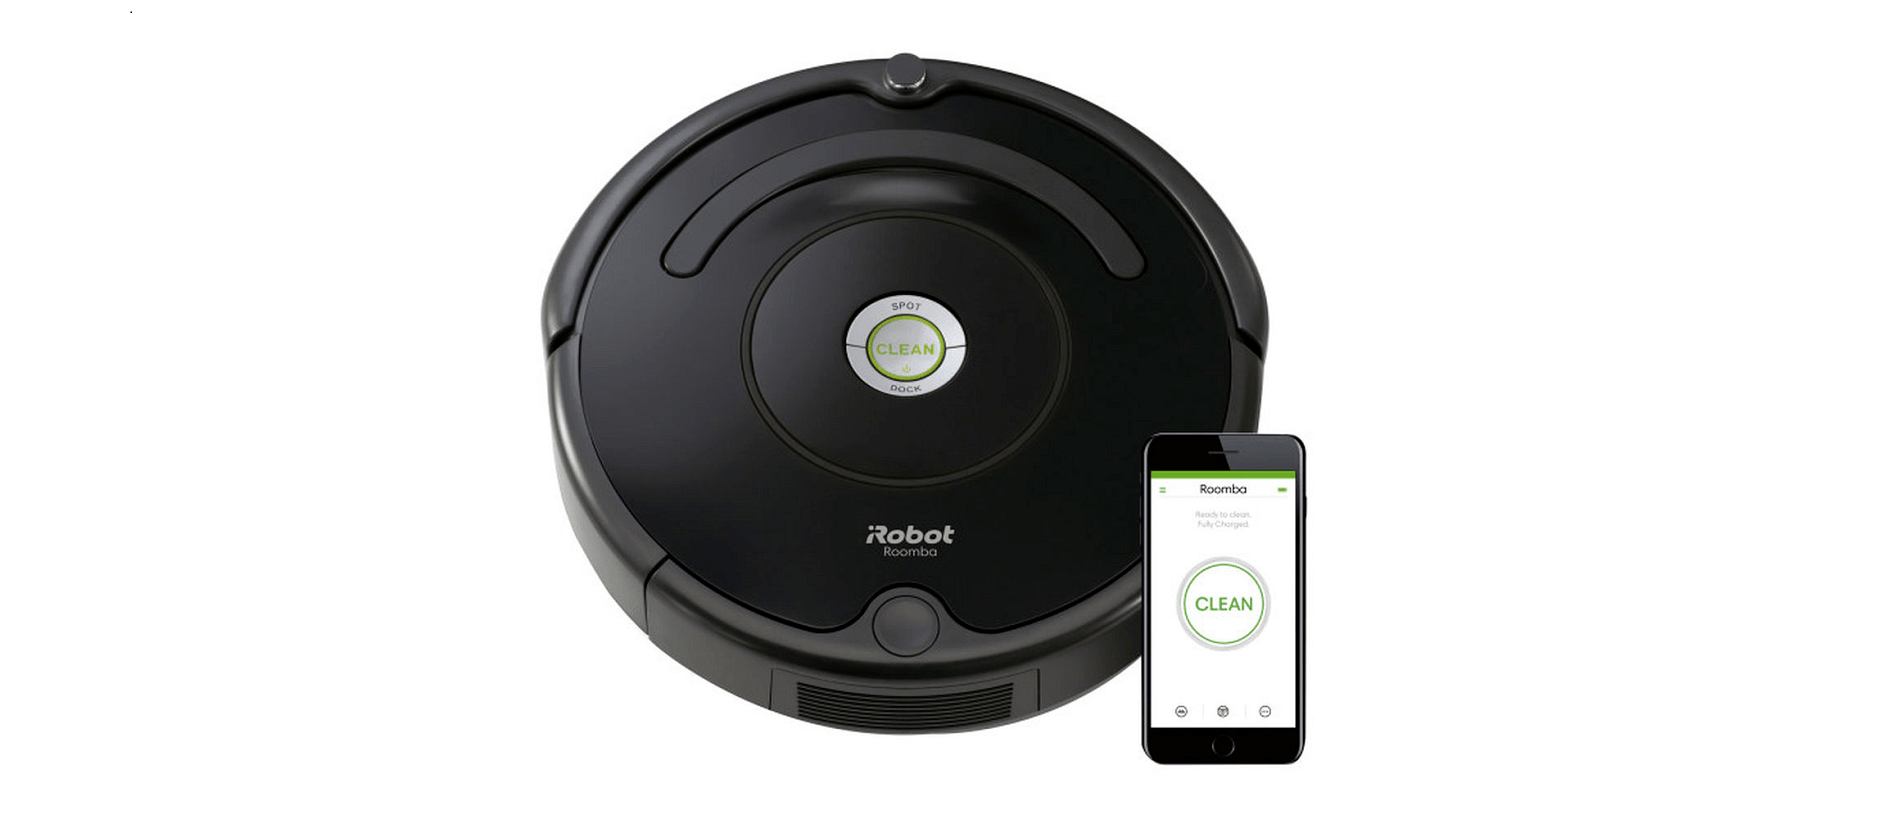 Roomba 671 Review - A Basic Vacuum at a Reasonable Price